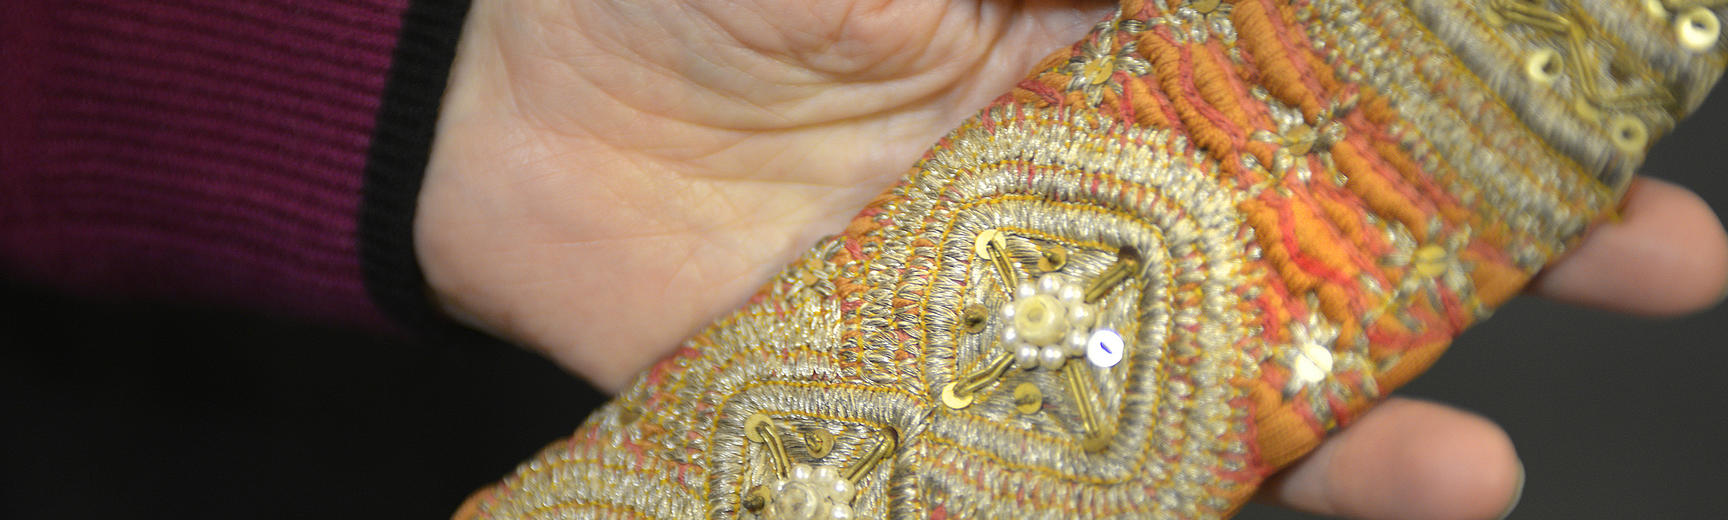 Hand holding a textile richly decorated with metallic threads, beads and sequins